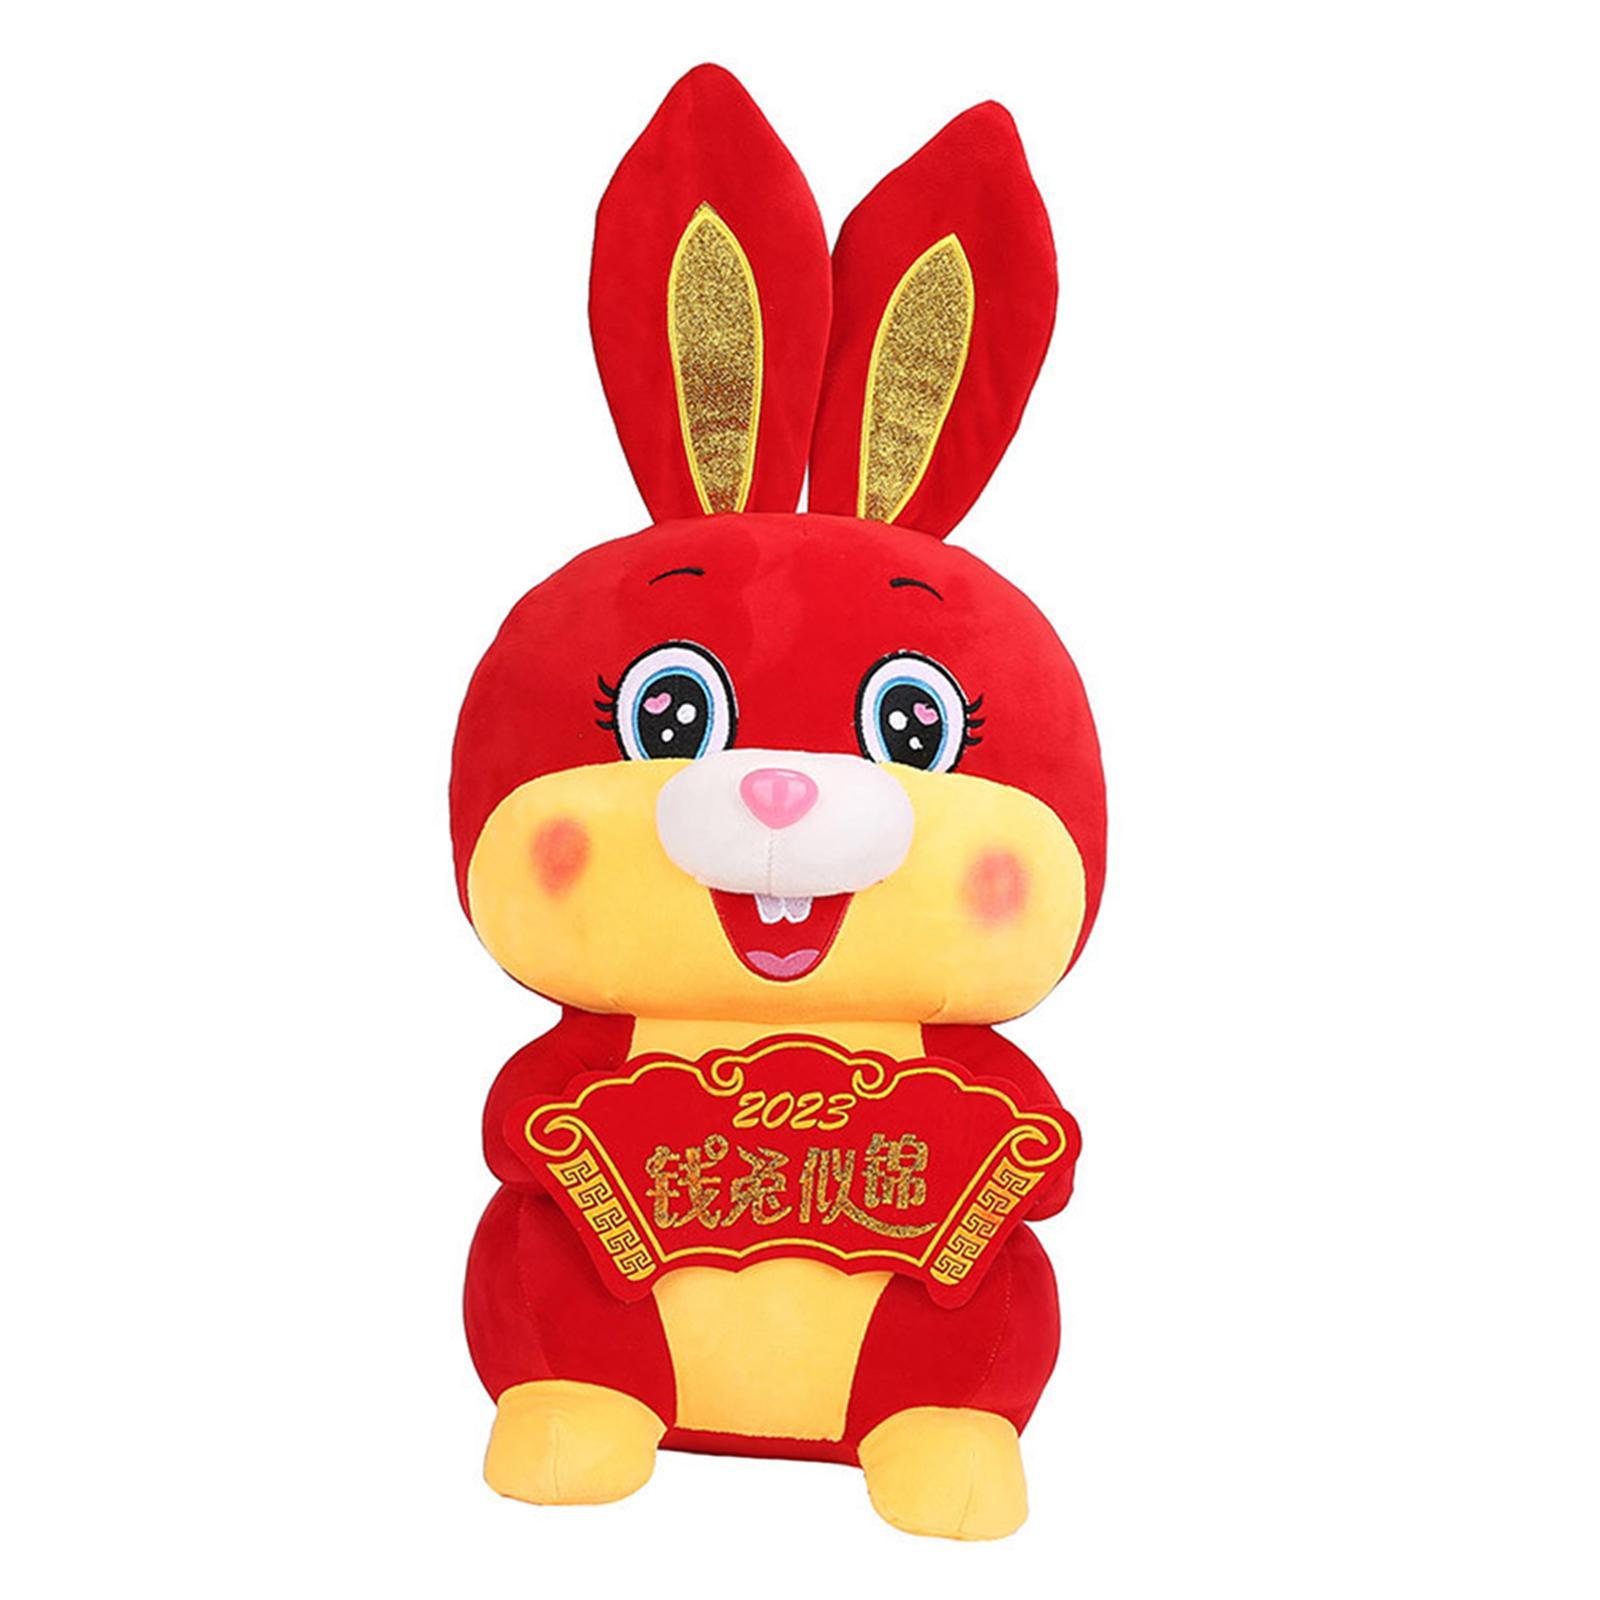 Chinese New Year Plush Toys Bunny Stuffed Dolls Decorative for Party Favor